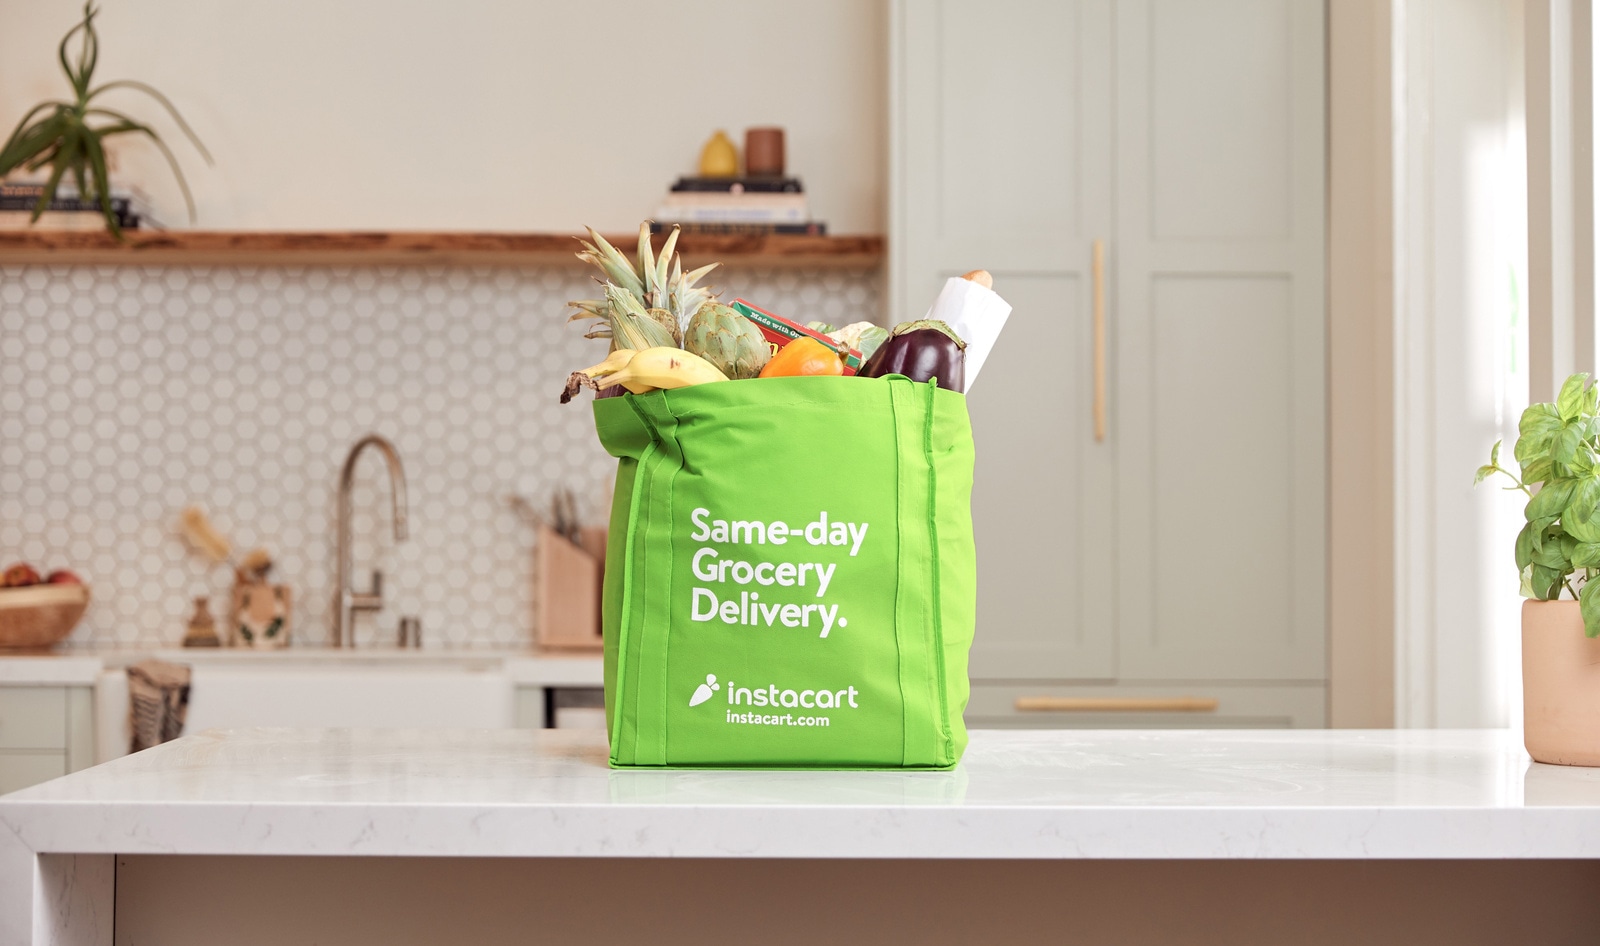 33 Percent of Instacart Shoppers Bought Plant-Based Meat or Milk in 2021